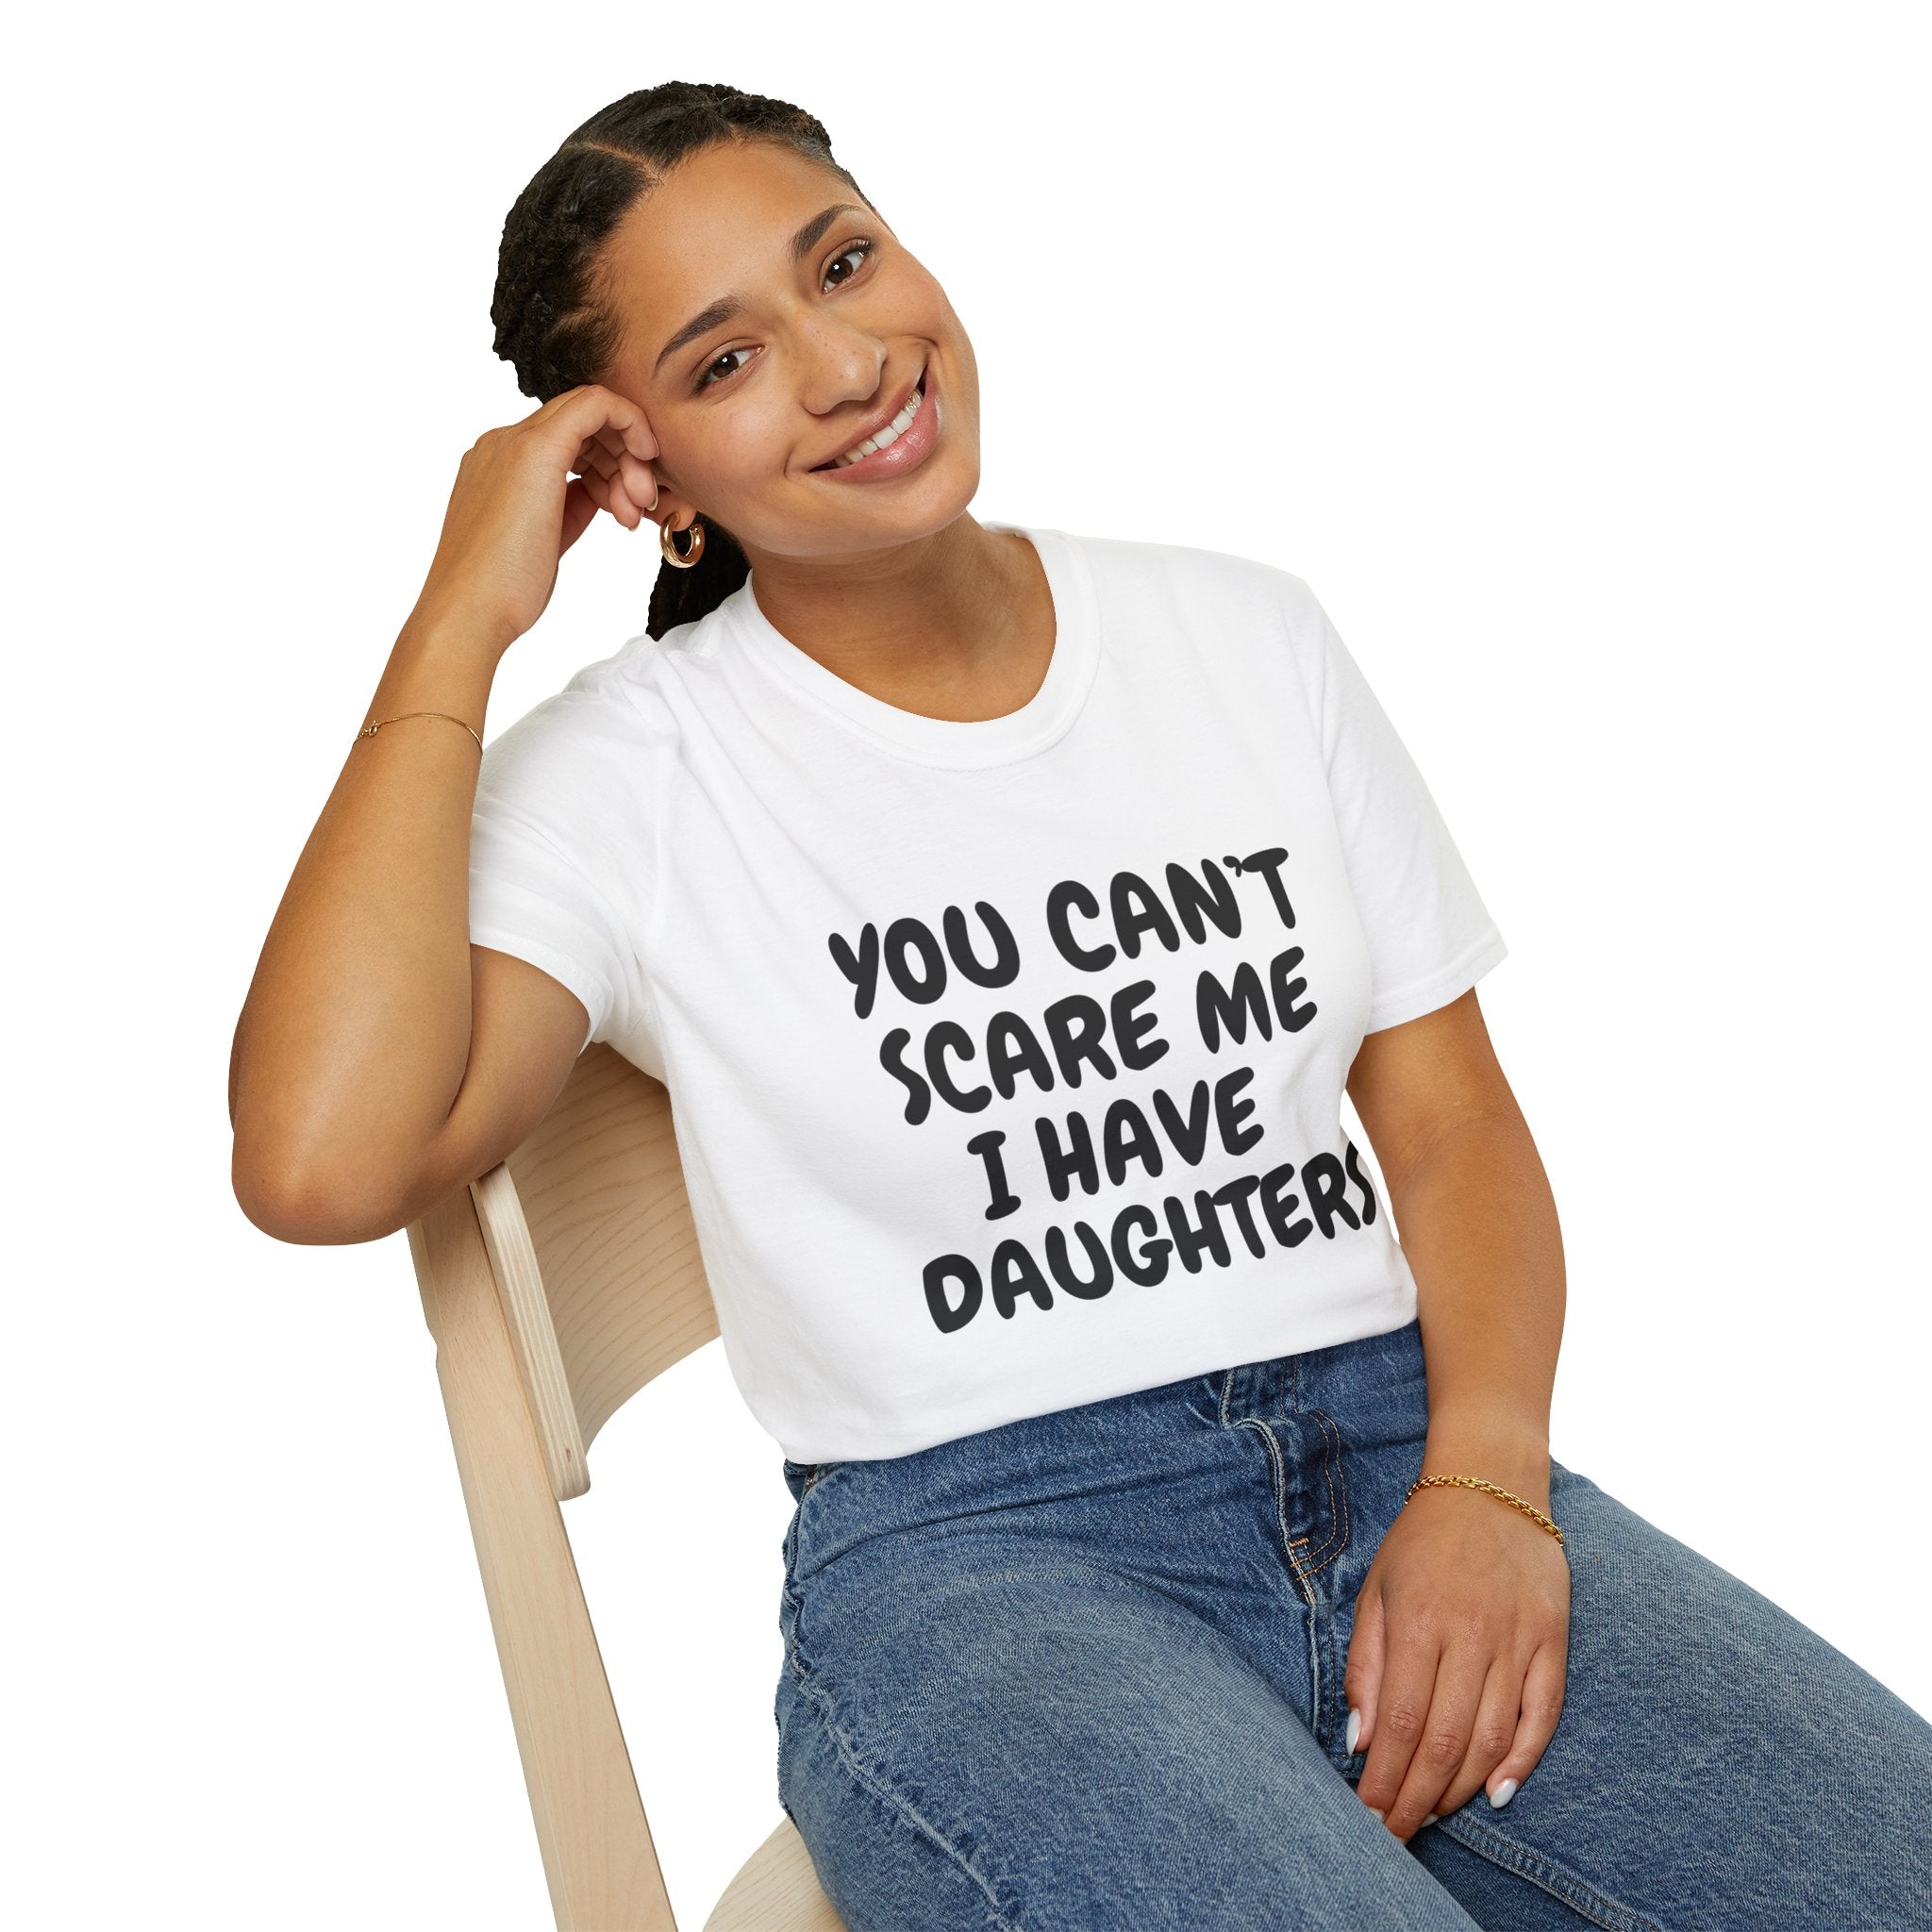 Father's Day Gift You Can't Scare Me I have Daughters Funny Dad T-shirt, Father's Day Gift, Gift for Dad, Dad Shirt, Men's T-shirt